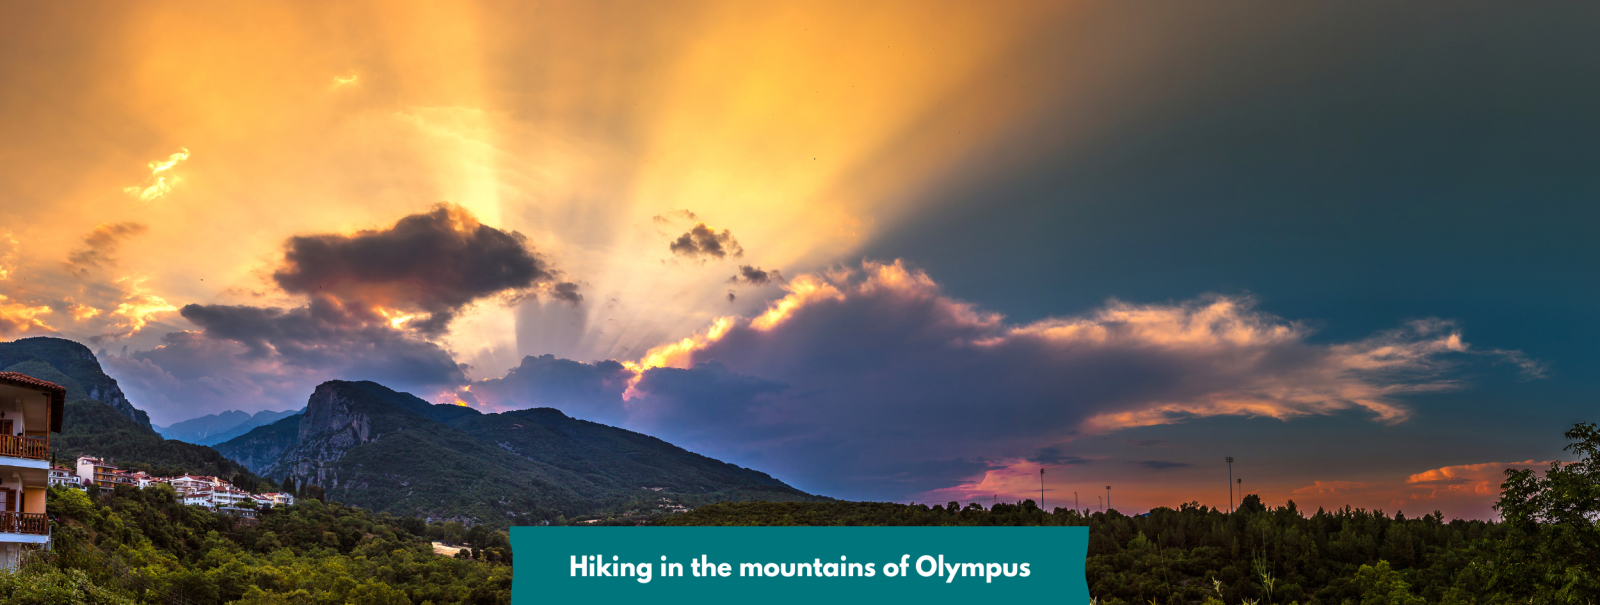 Hiking in the mountains of Olympus